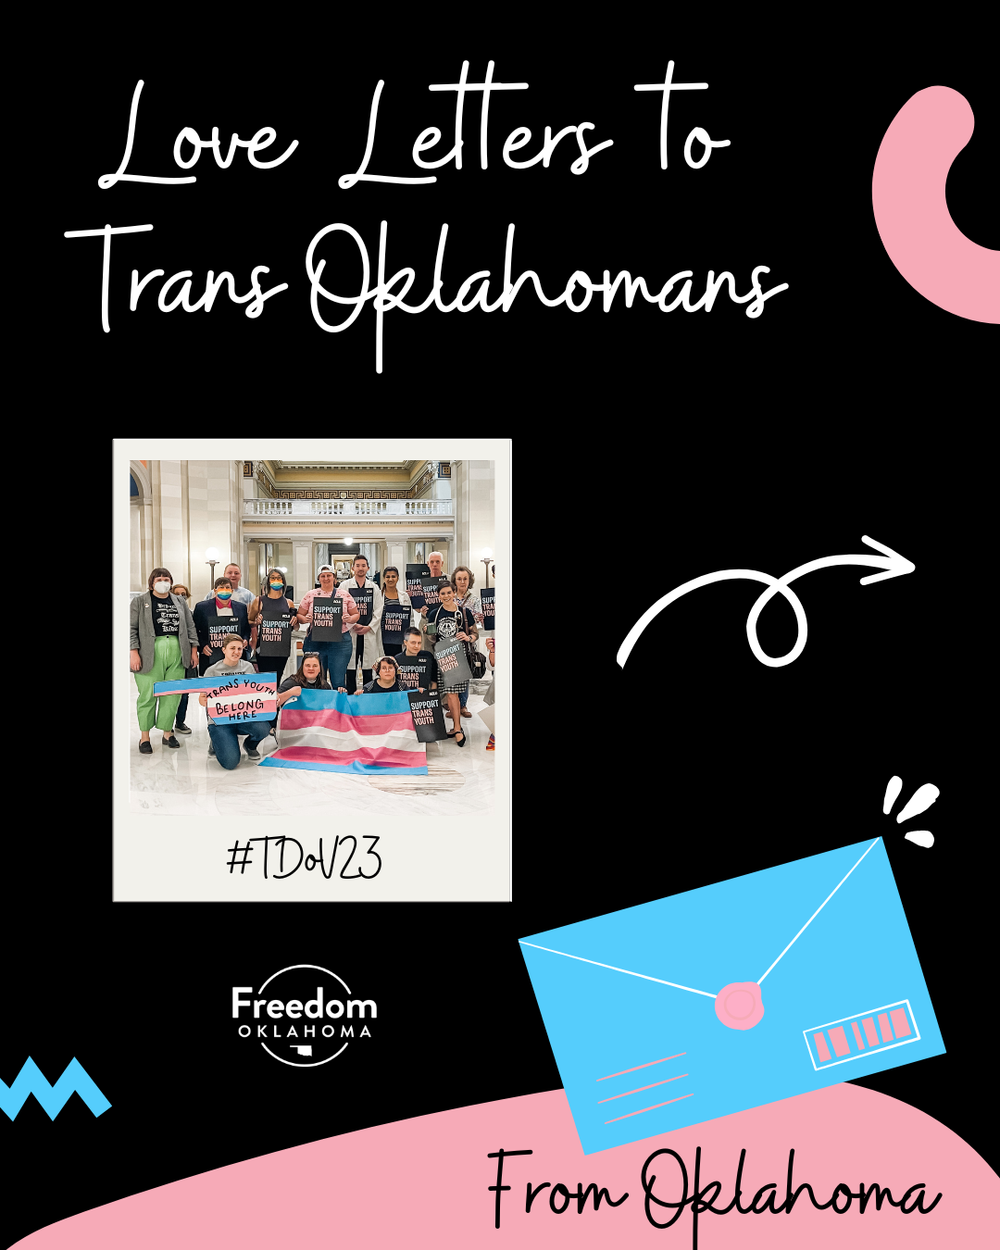  "Love Letters to Trans Oklahomans From Oklahoma #TDoV23" on a black background with abstract shapes and a cartoon envelope in pink, blue, and white. There's a polaroid picture with an image from a trans rally at the Capitol. An arrow points to the r